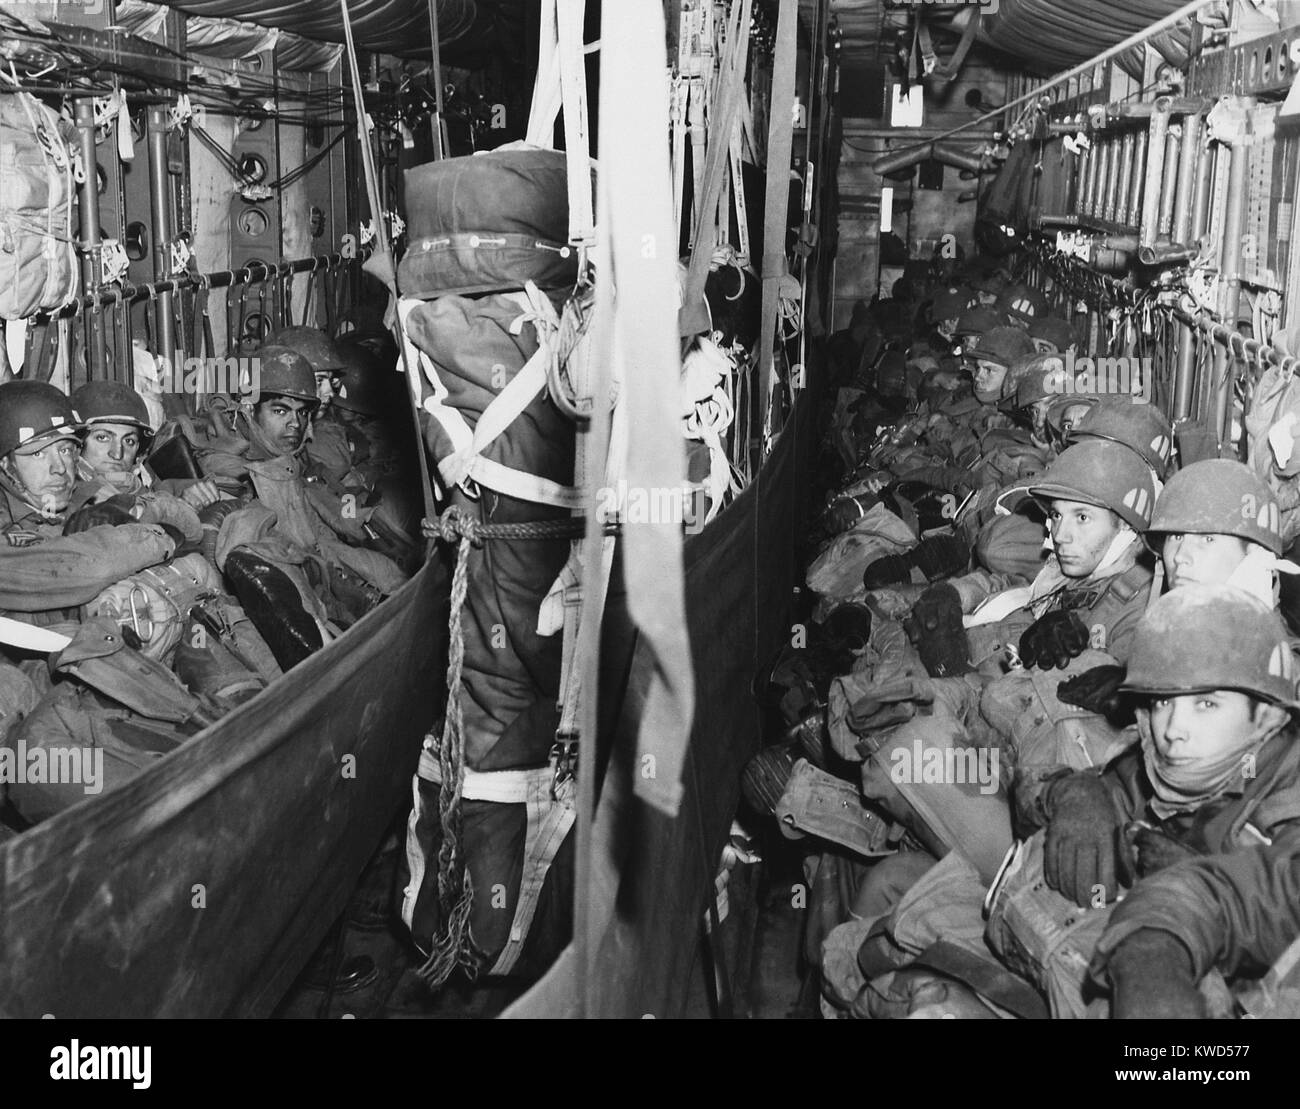 U.S. Airborne combat team en route to a drop zone at Munsan-ni, Korea, on March, 22, 1951. Packed into a C-119 Flying Boxcar, they jumped on the south bank of the Imjin River, 20 miles behind front line. Their mission to trap Communist forces retreating from Seoul was only partially successful because the enemy had already left. Korean War, 1950-53. (BSLOC 2014 11 217) Stock Photo